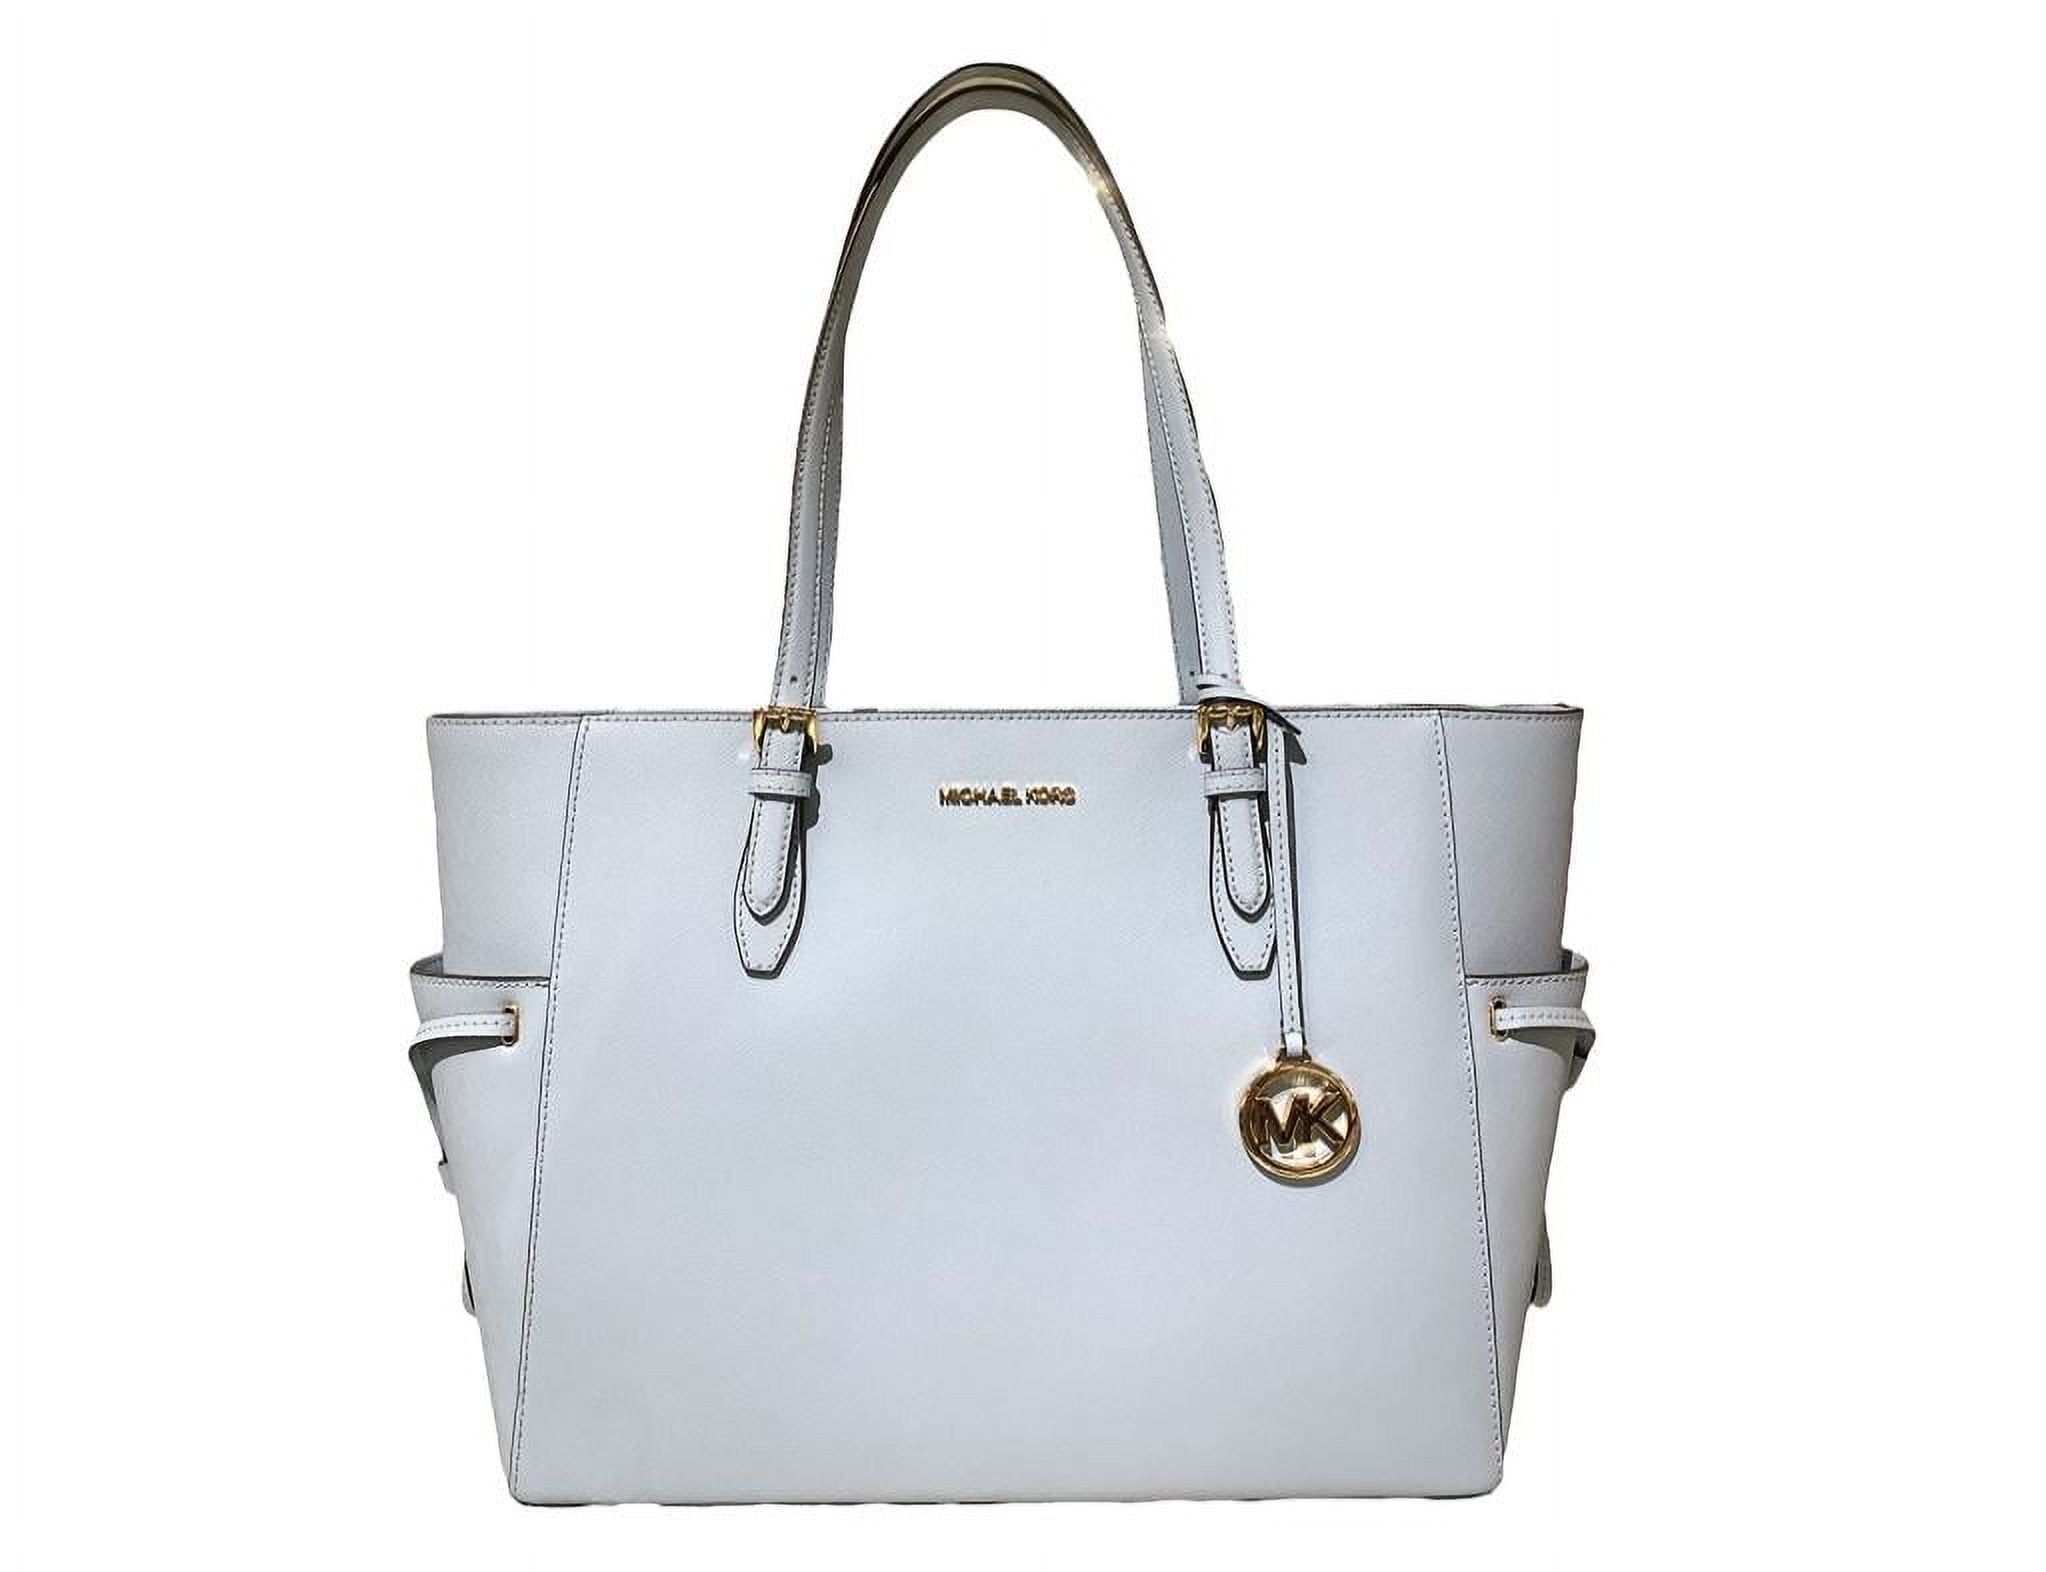 MICHAEL KORS Outlet: Michael Ruby bag in saffiano leather - Black | MICHAEL  KORS tote bags 30S3GR0T3L online at GIGLIO.COM